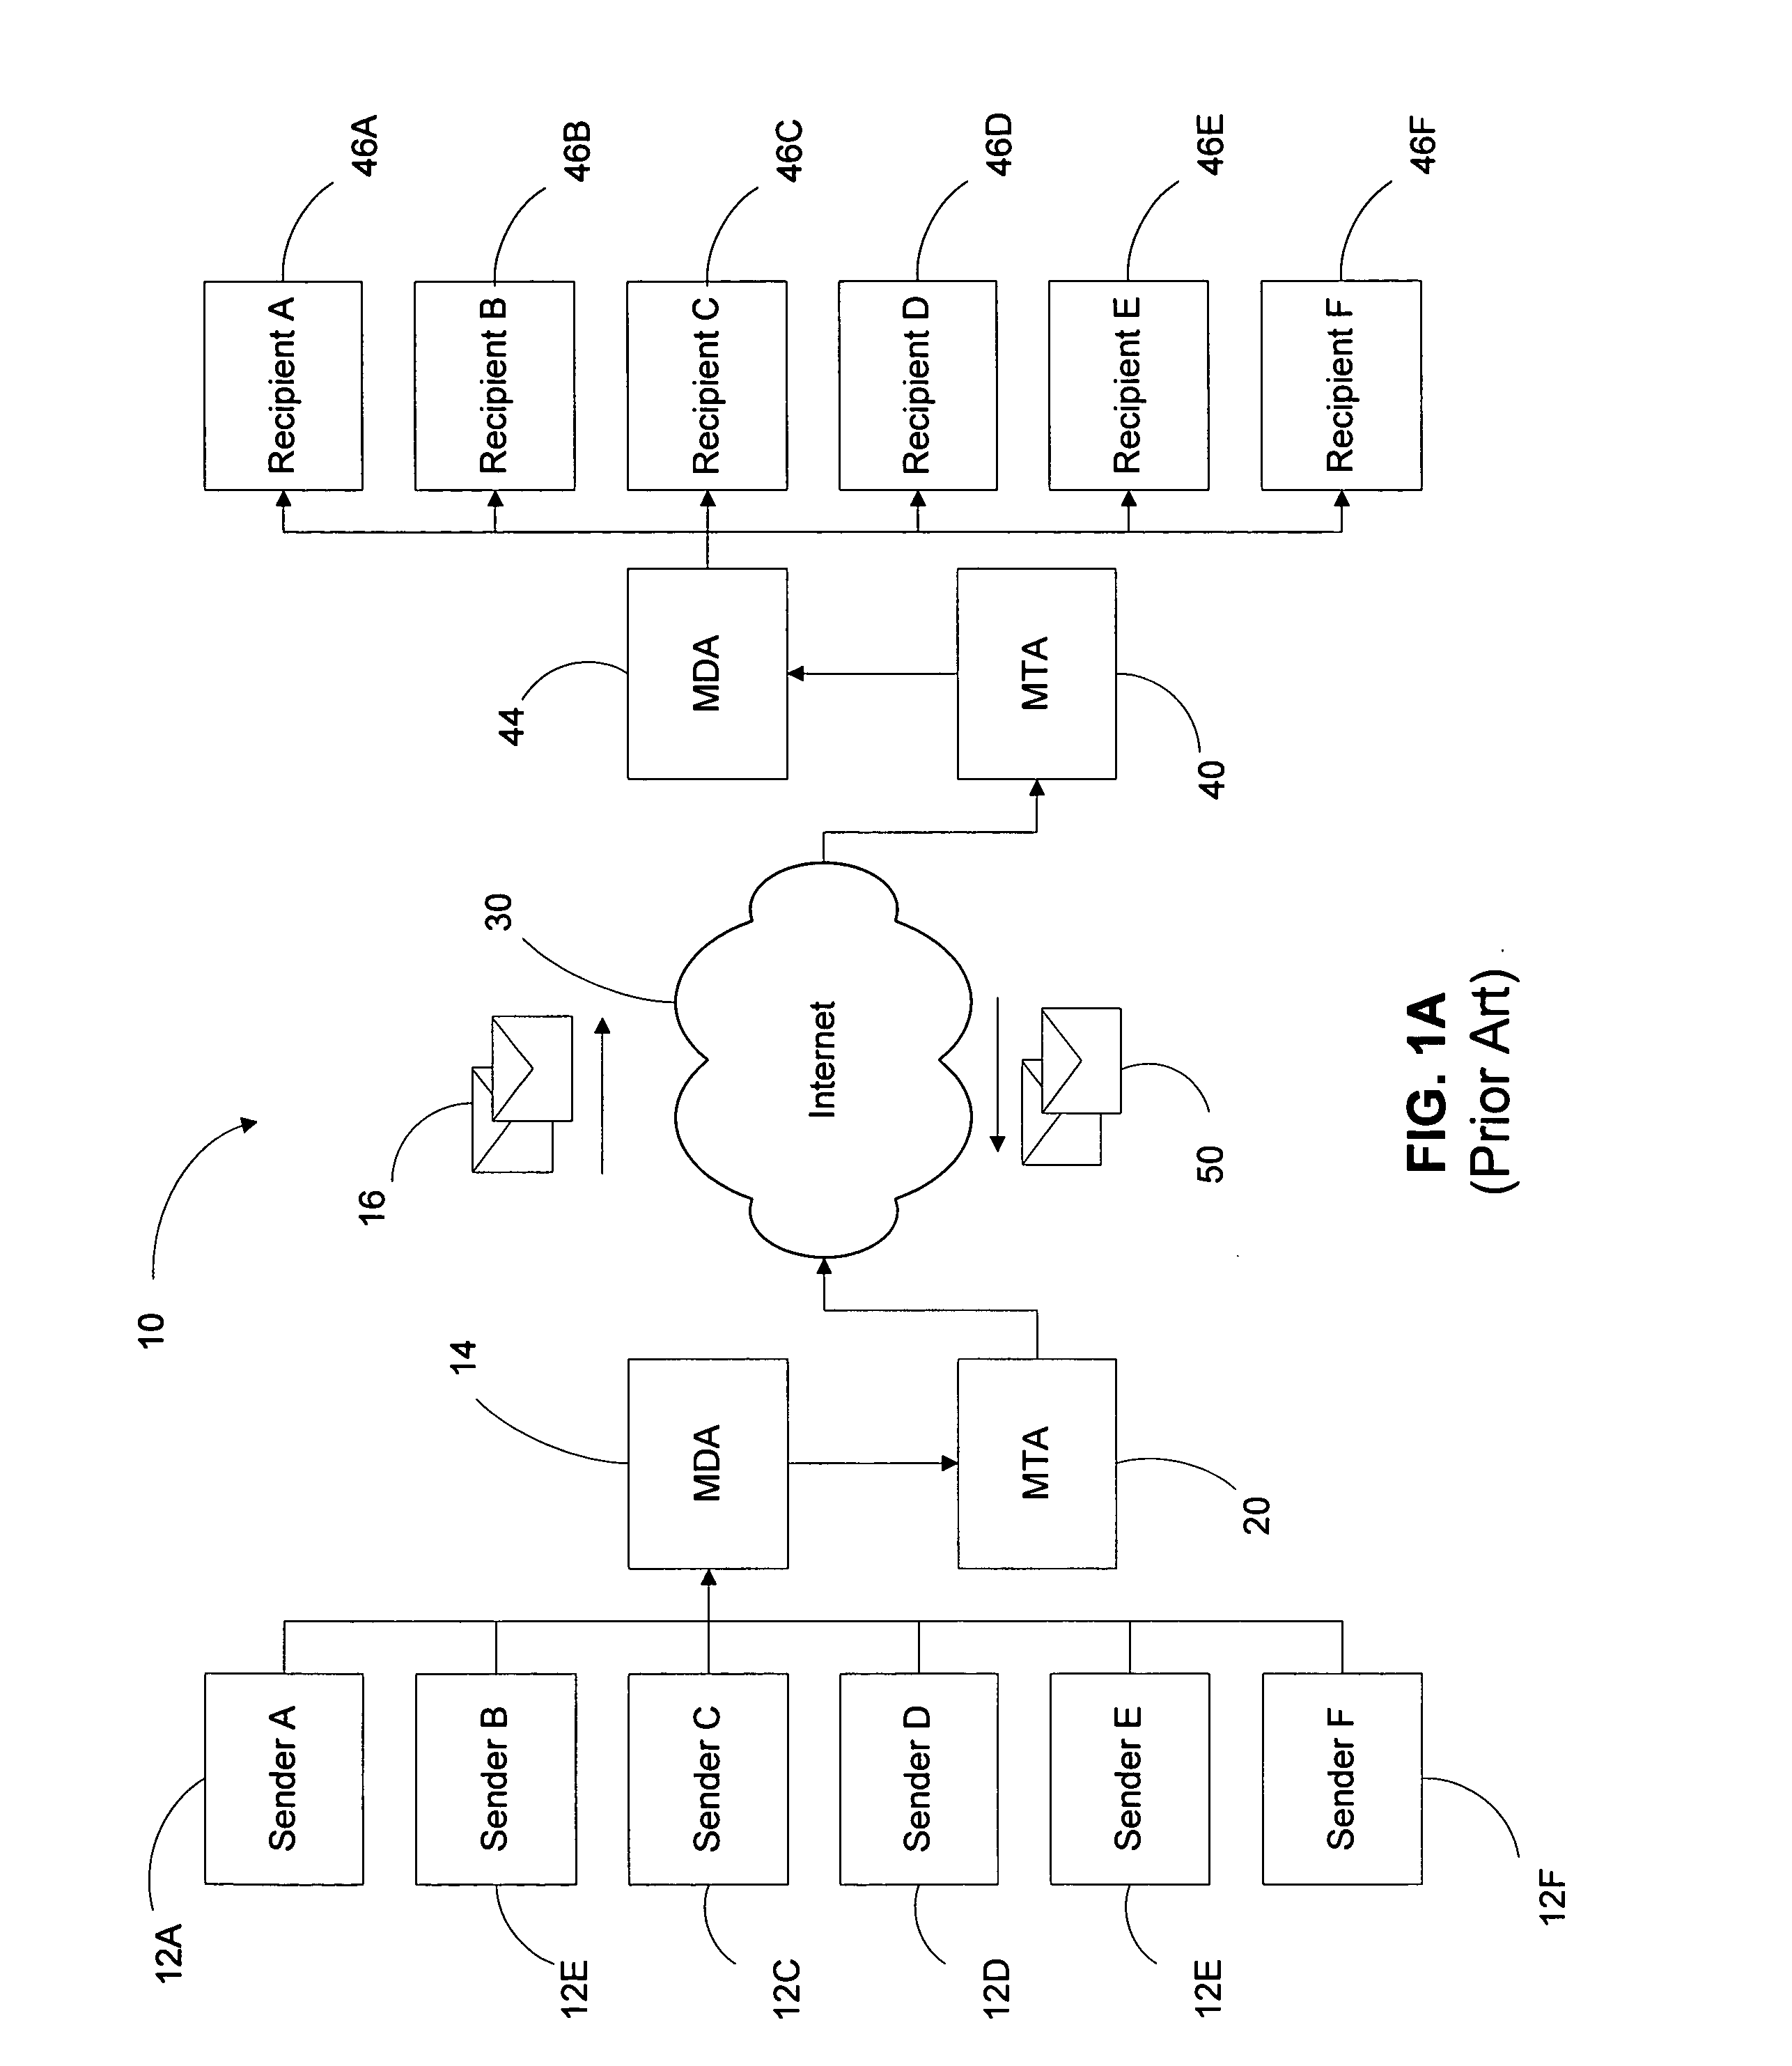 High performance electronic message delivery engine